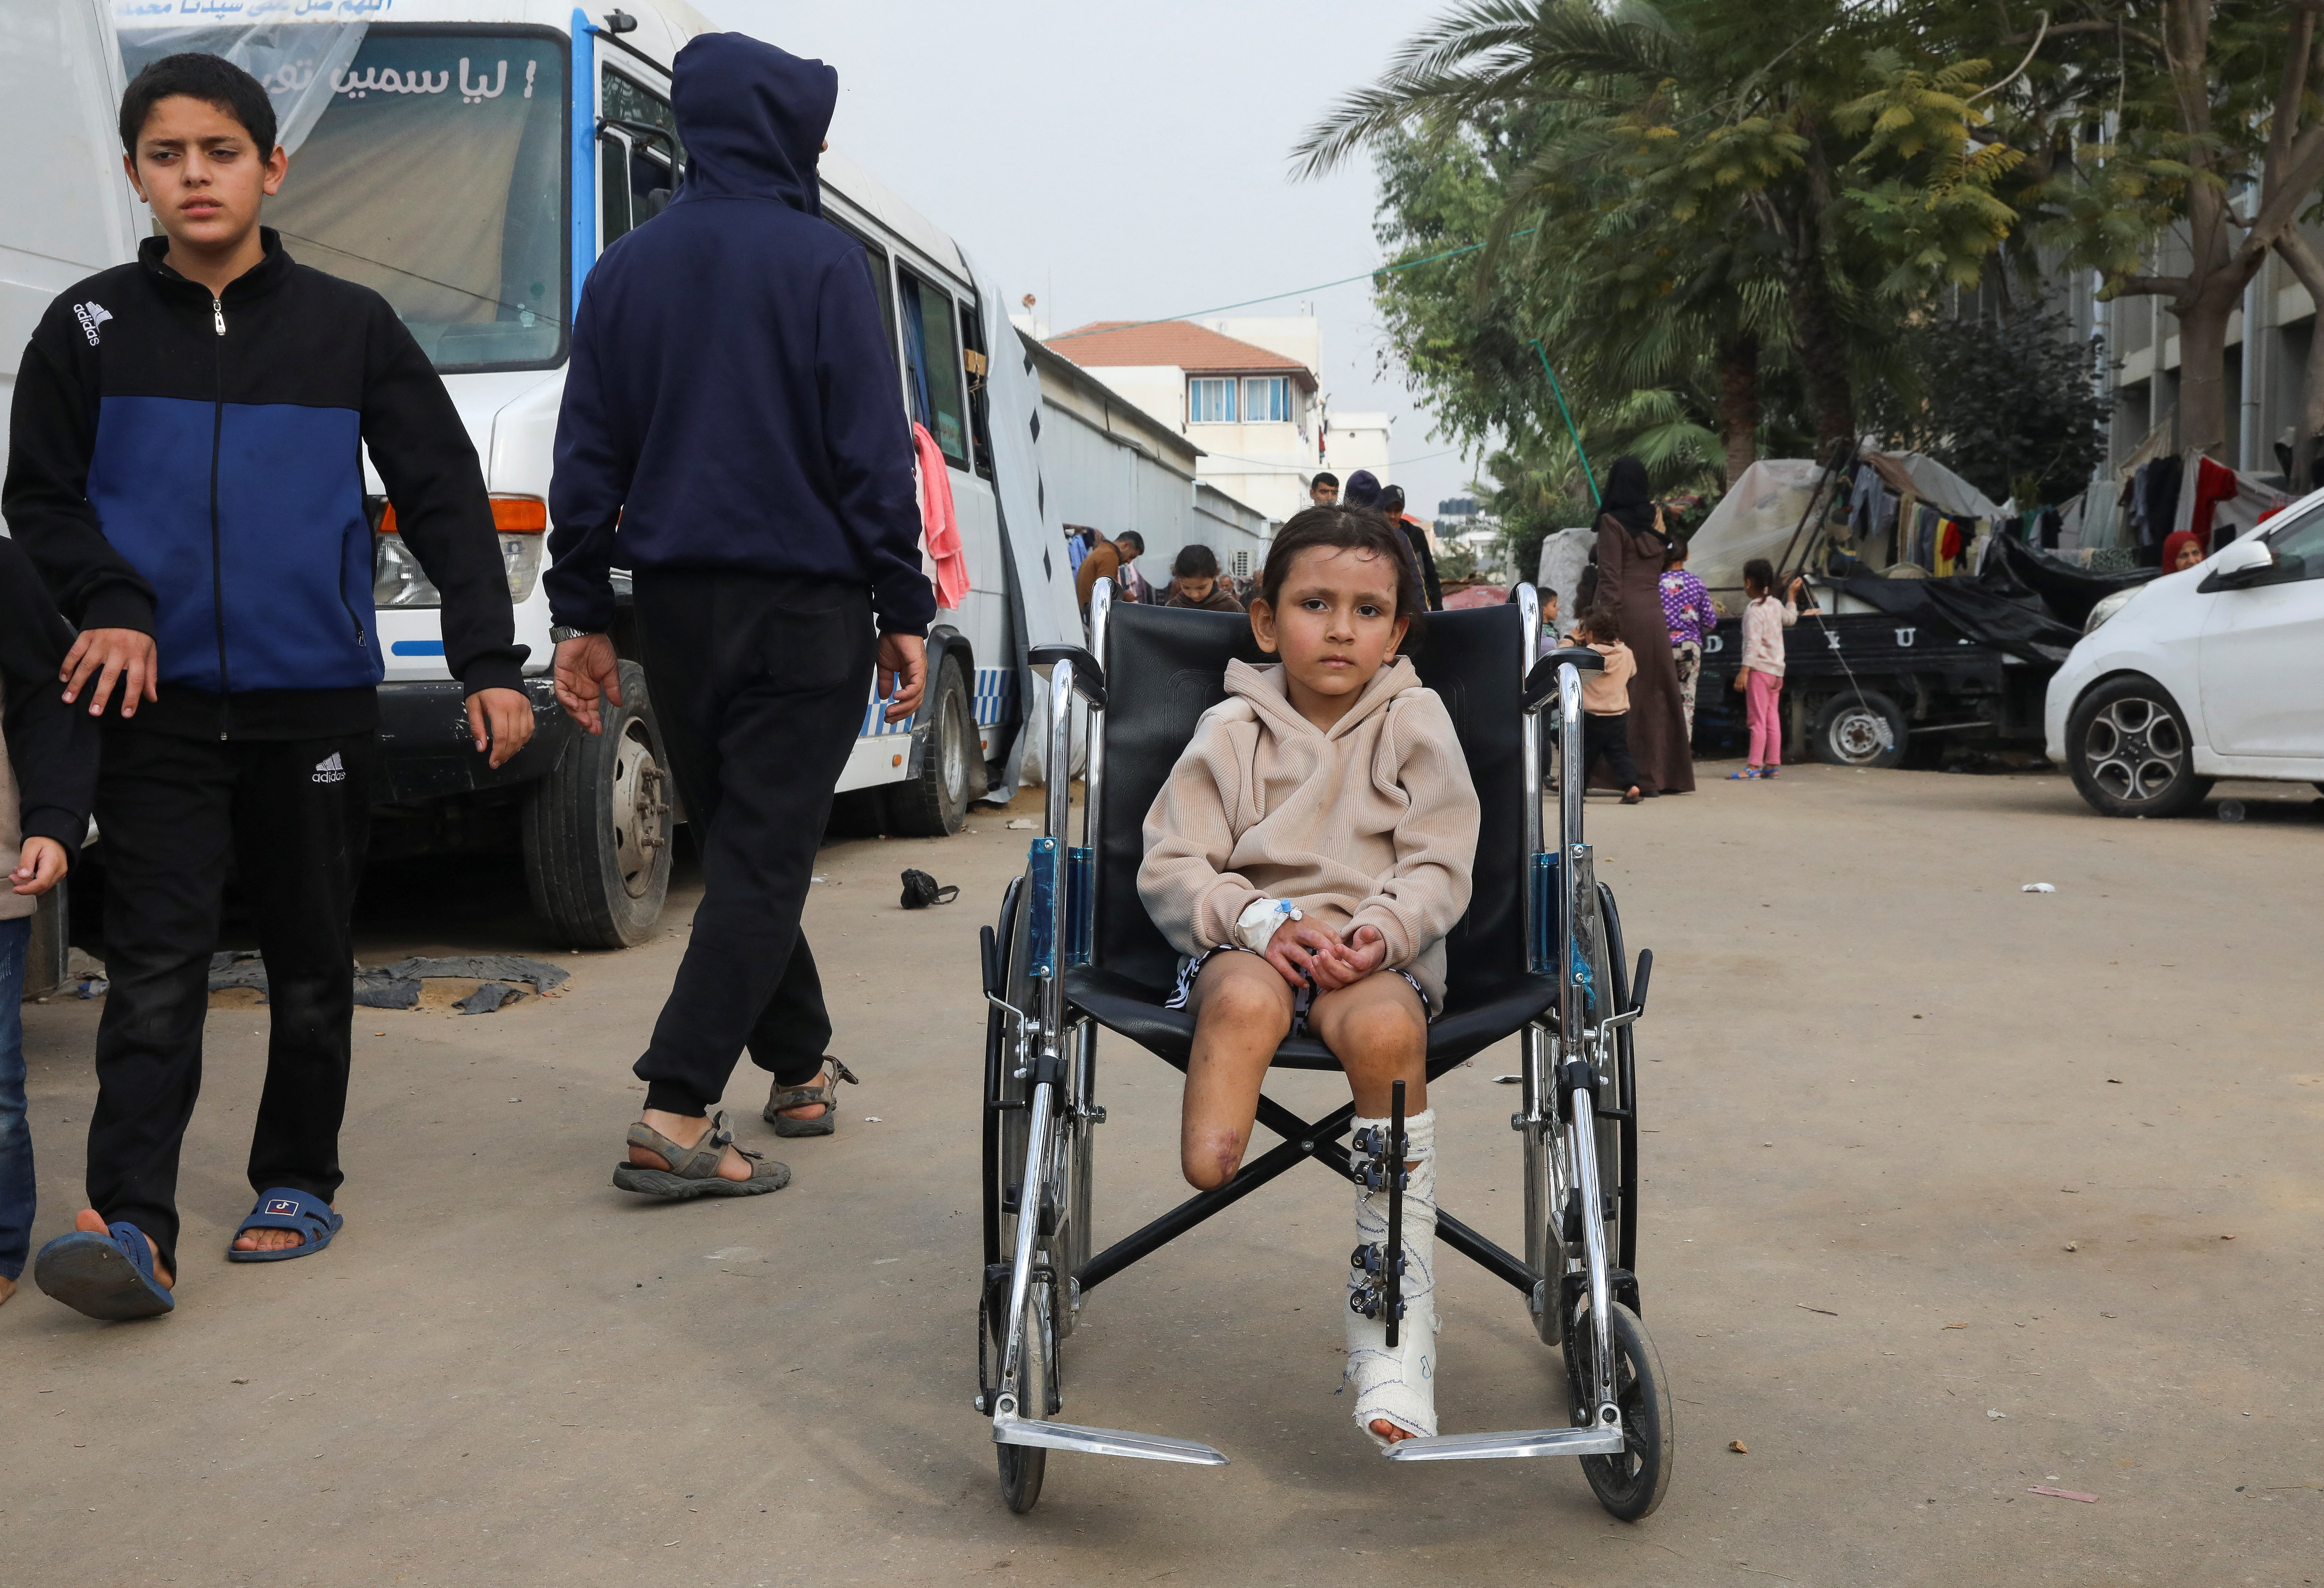 Gaza's child amputees face further risks without expert care